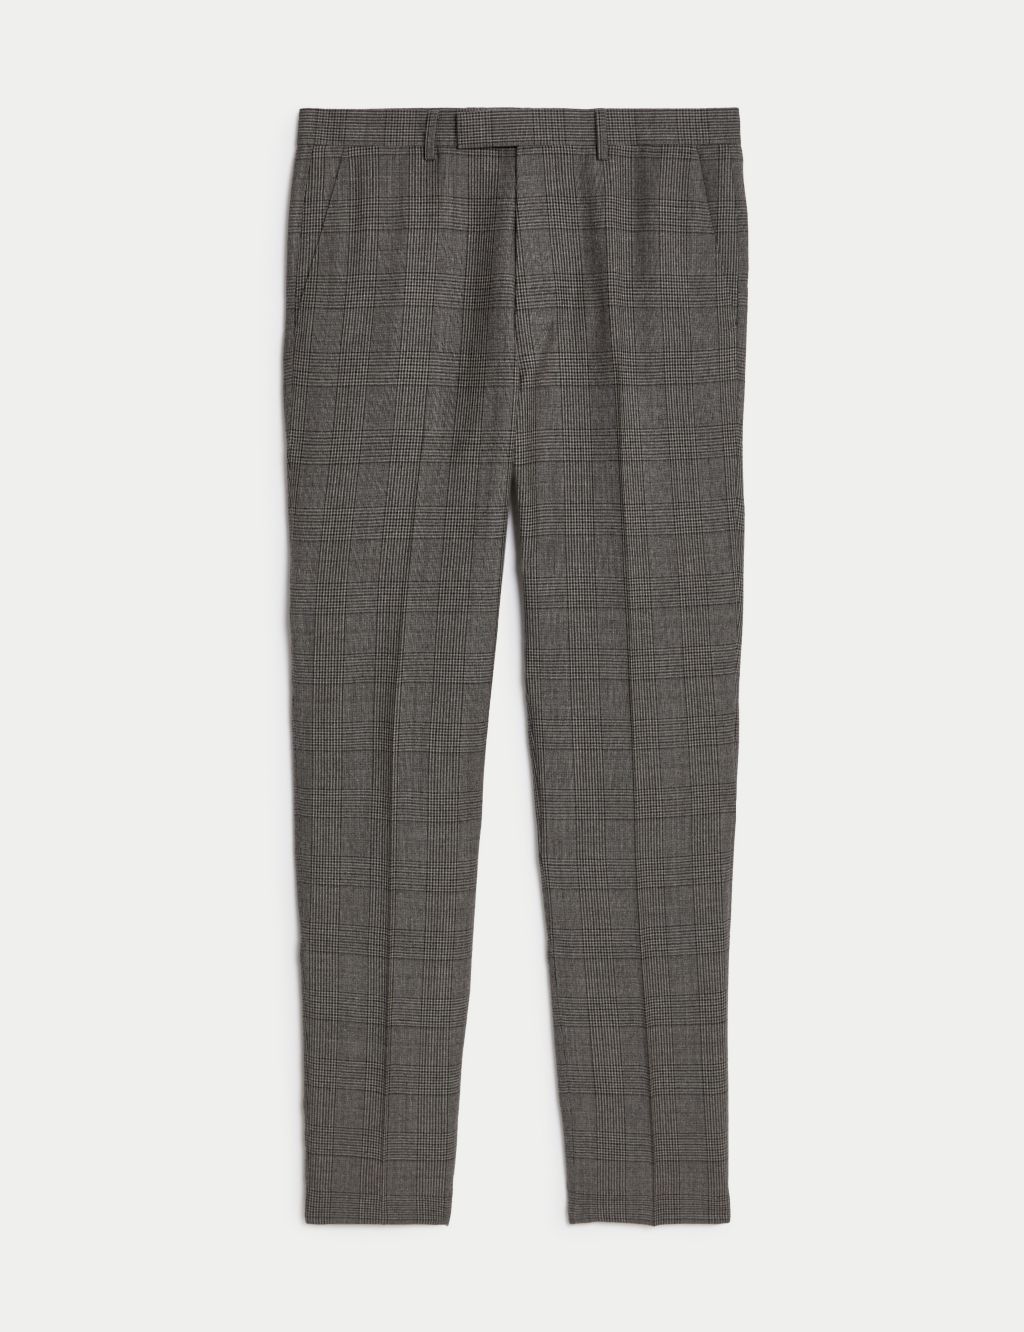 Tailored Fit British Wool Suit Trousers image 2